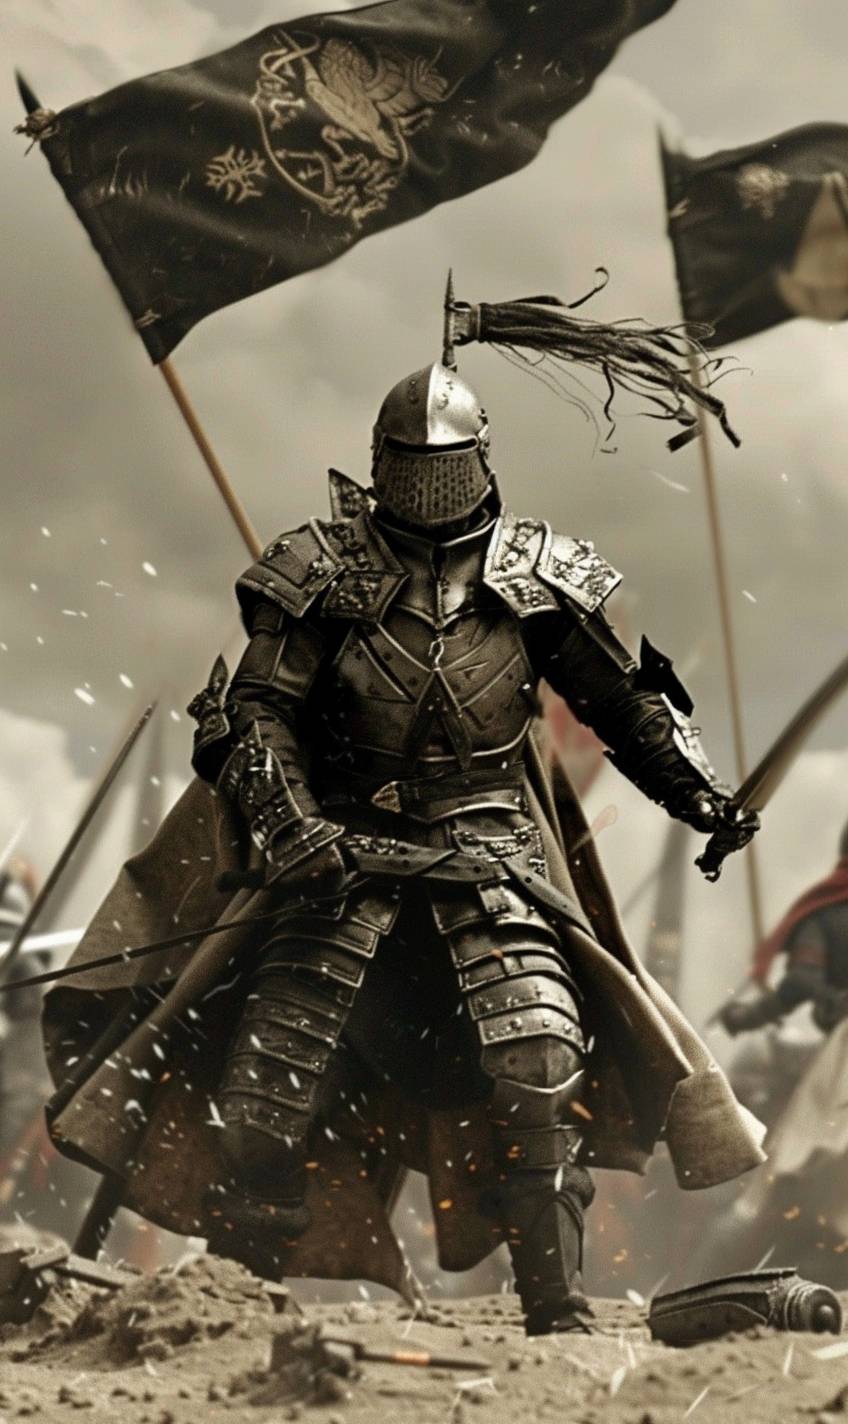 A heroic knight in shining armor, standing on a battlefield at dawn, banners flying, determined expression, epic fantasy scene